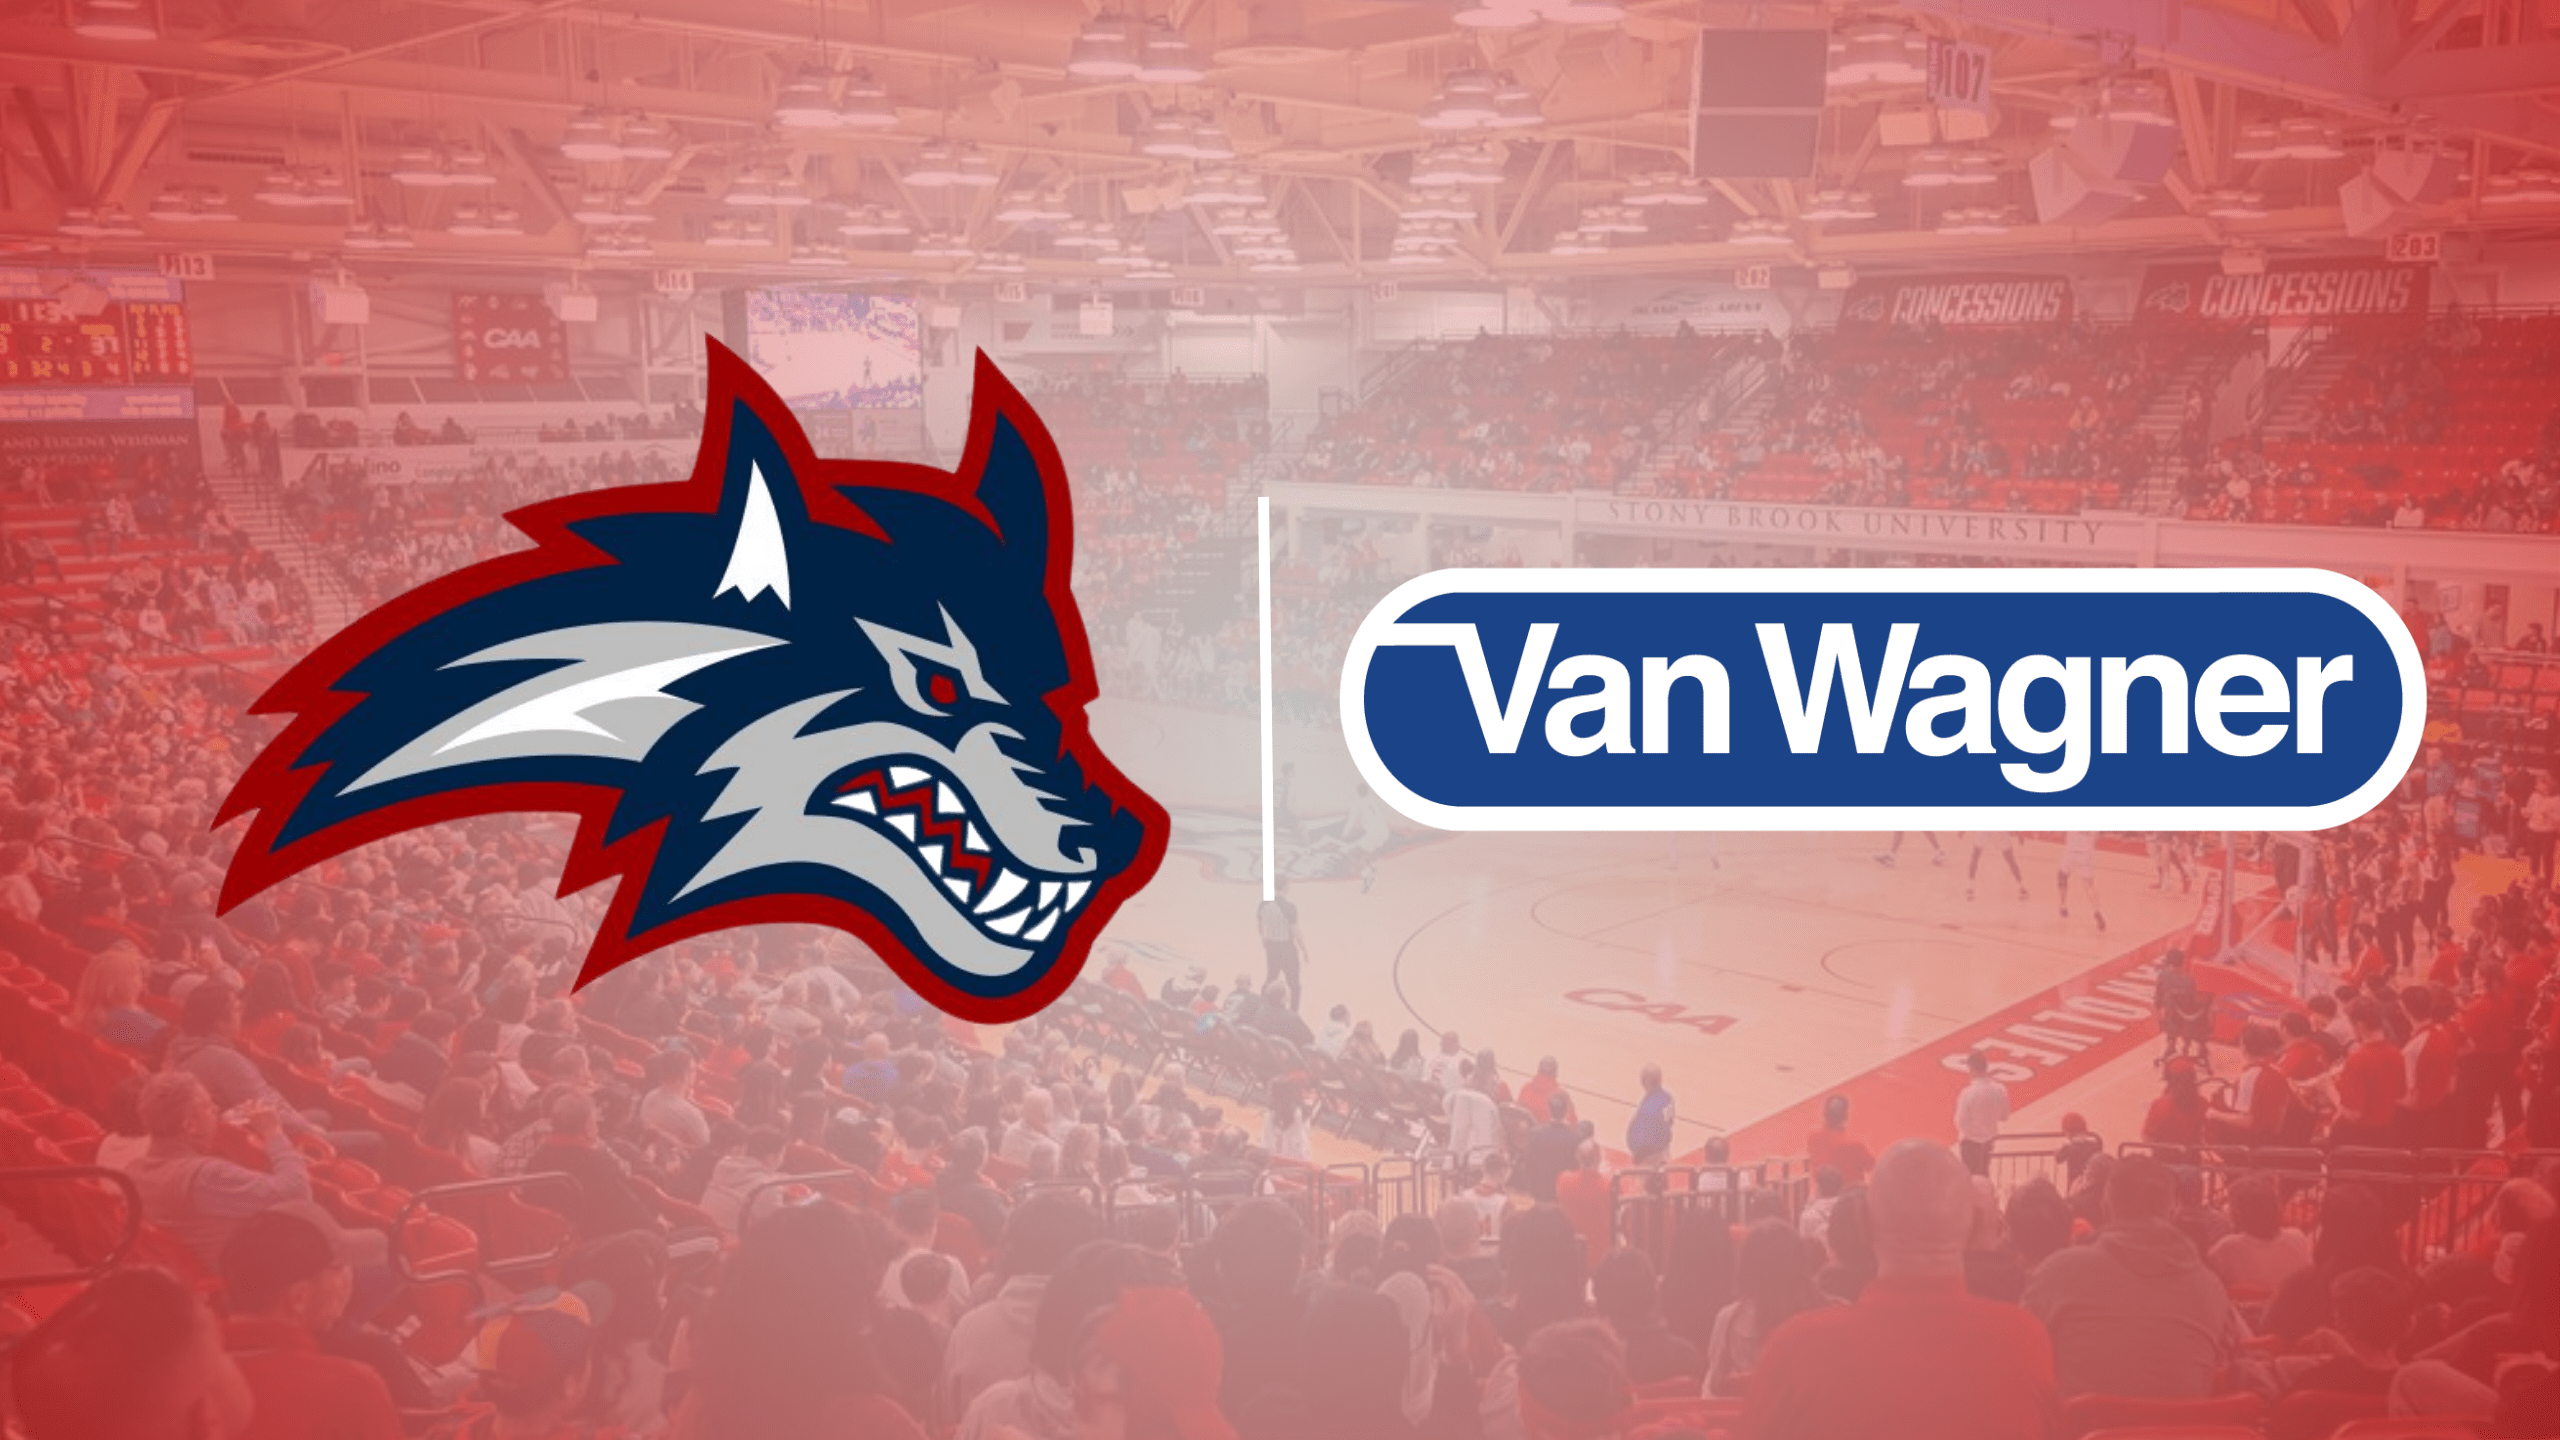 Stony Brook Engages Van Wagner for New Naming Rights Partner featured image